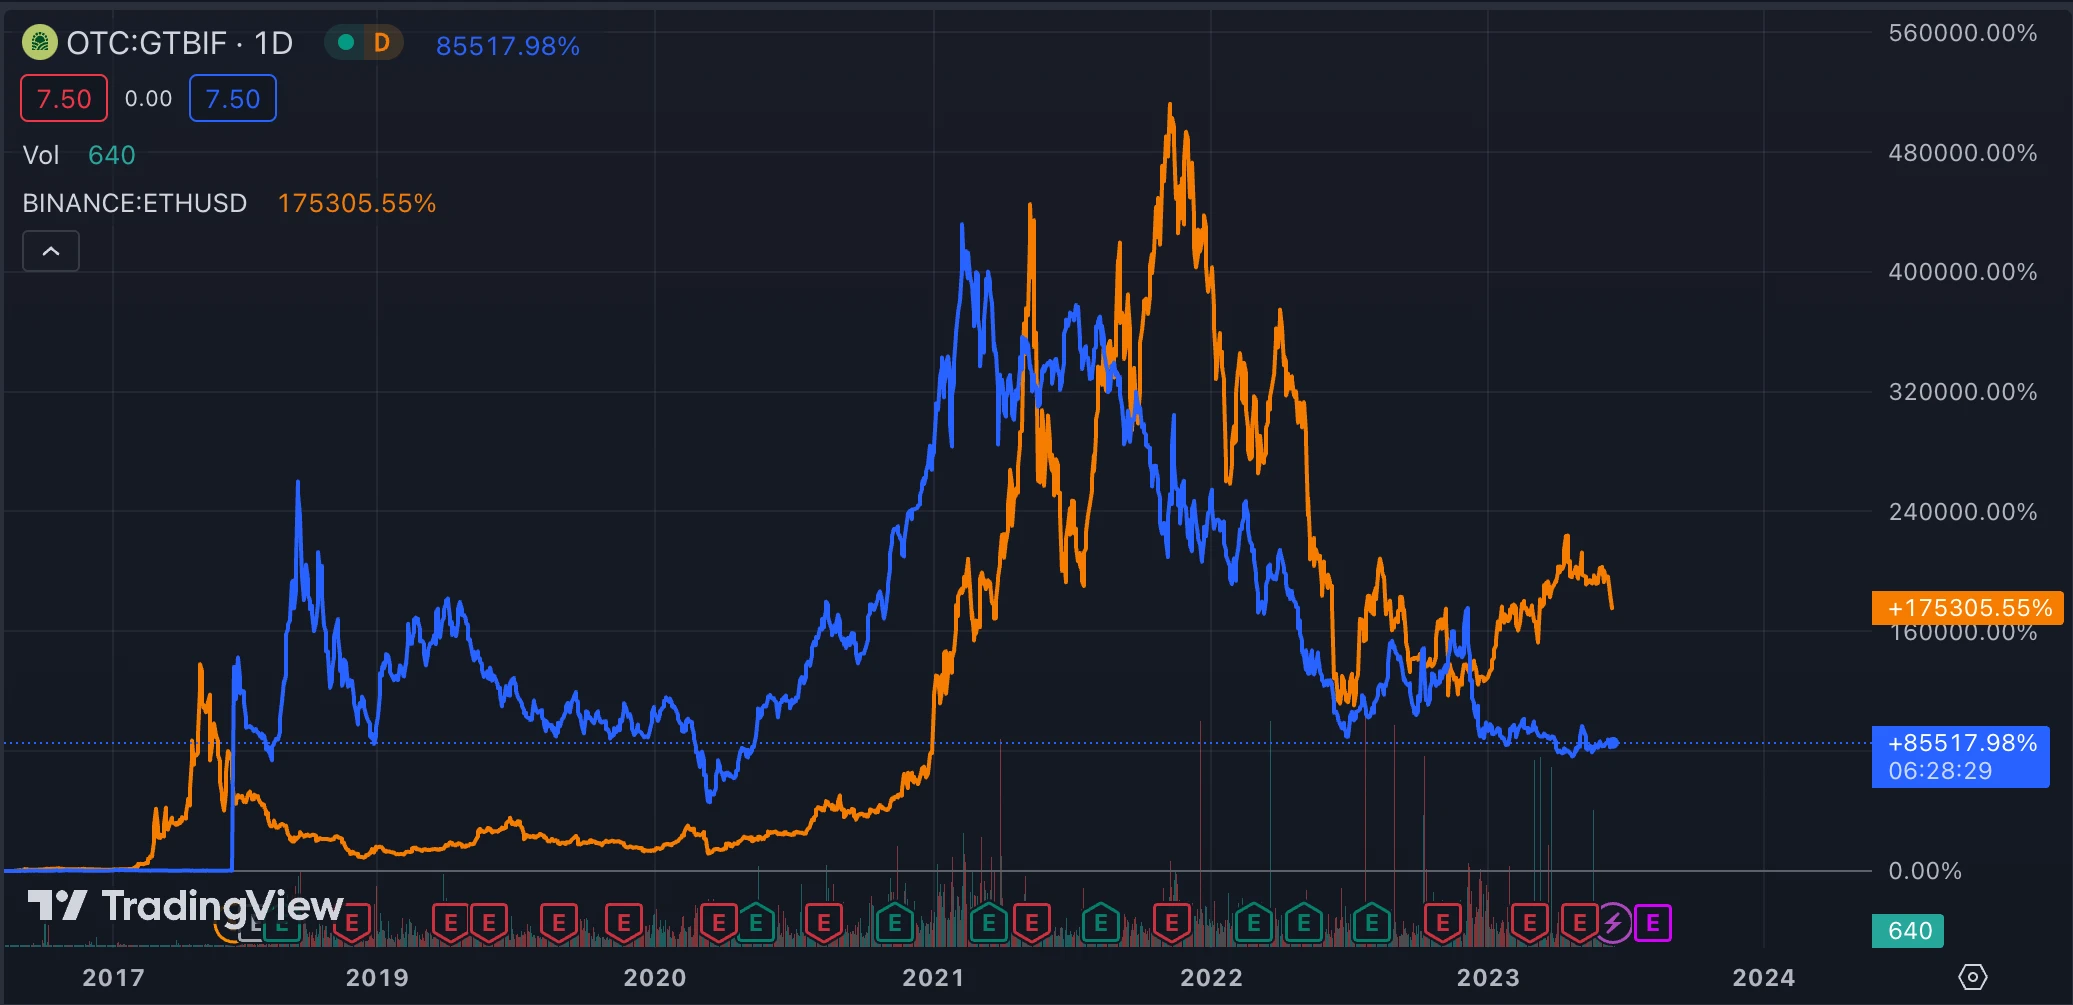 Ethereum price performance (orange) compared to one of the largest U.S. multistate cannabis operators, Green Thumb Industries (blue). Source: TradingView